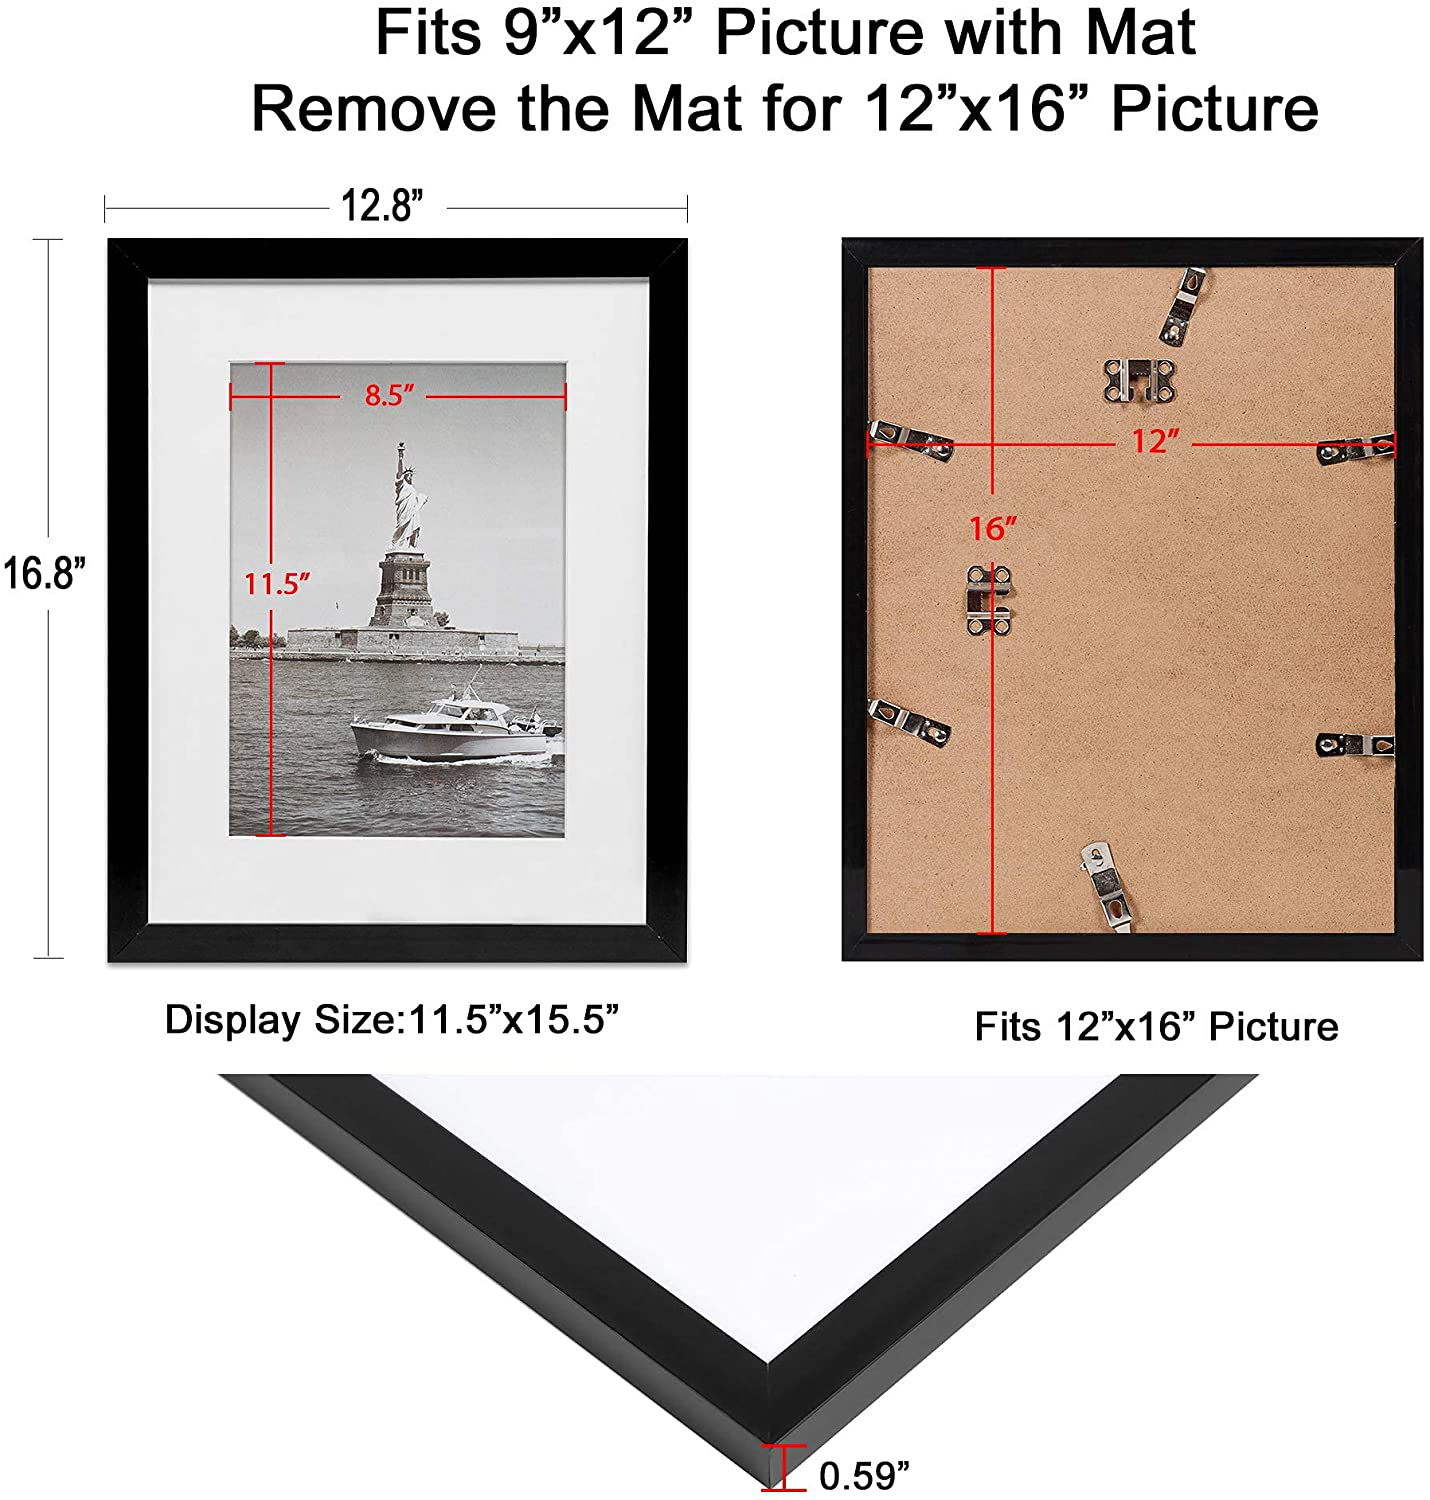 ENJOYBASICS 12x18 Picture Frame Black Poster Frame,Display Pictures 11x17 with Mat or 12x18 Without Mat,Wall Gallery Photo Frames,2 Pack